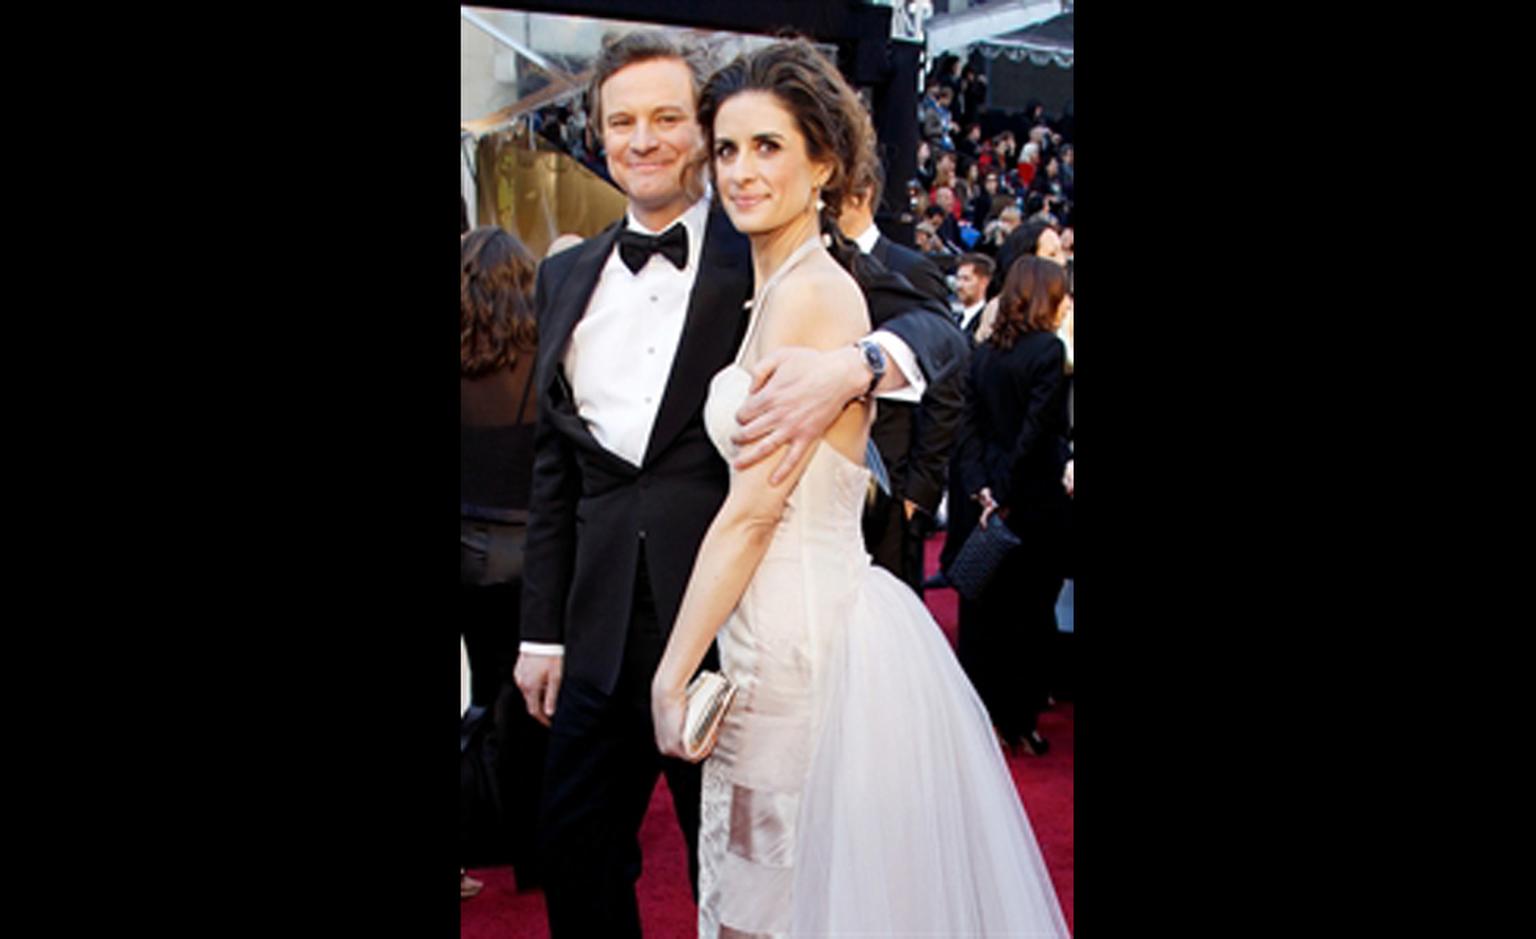 Colin Firth with a Chopard on his wrist and his wife Livia Giuggioli tucked under his arm at the Oscars 2011